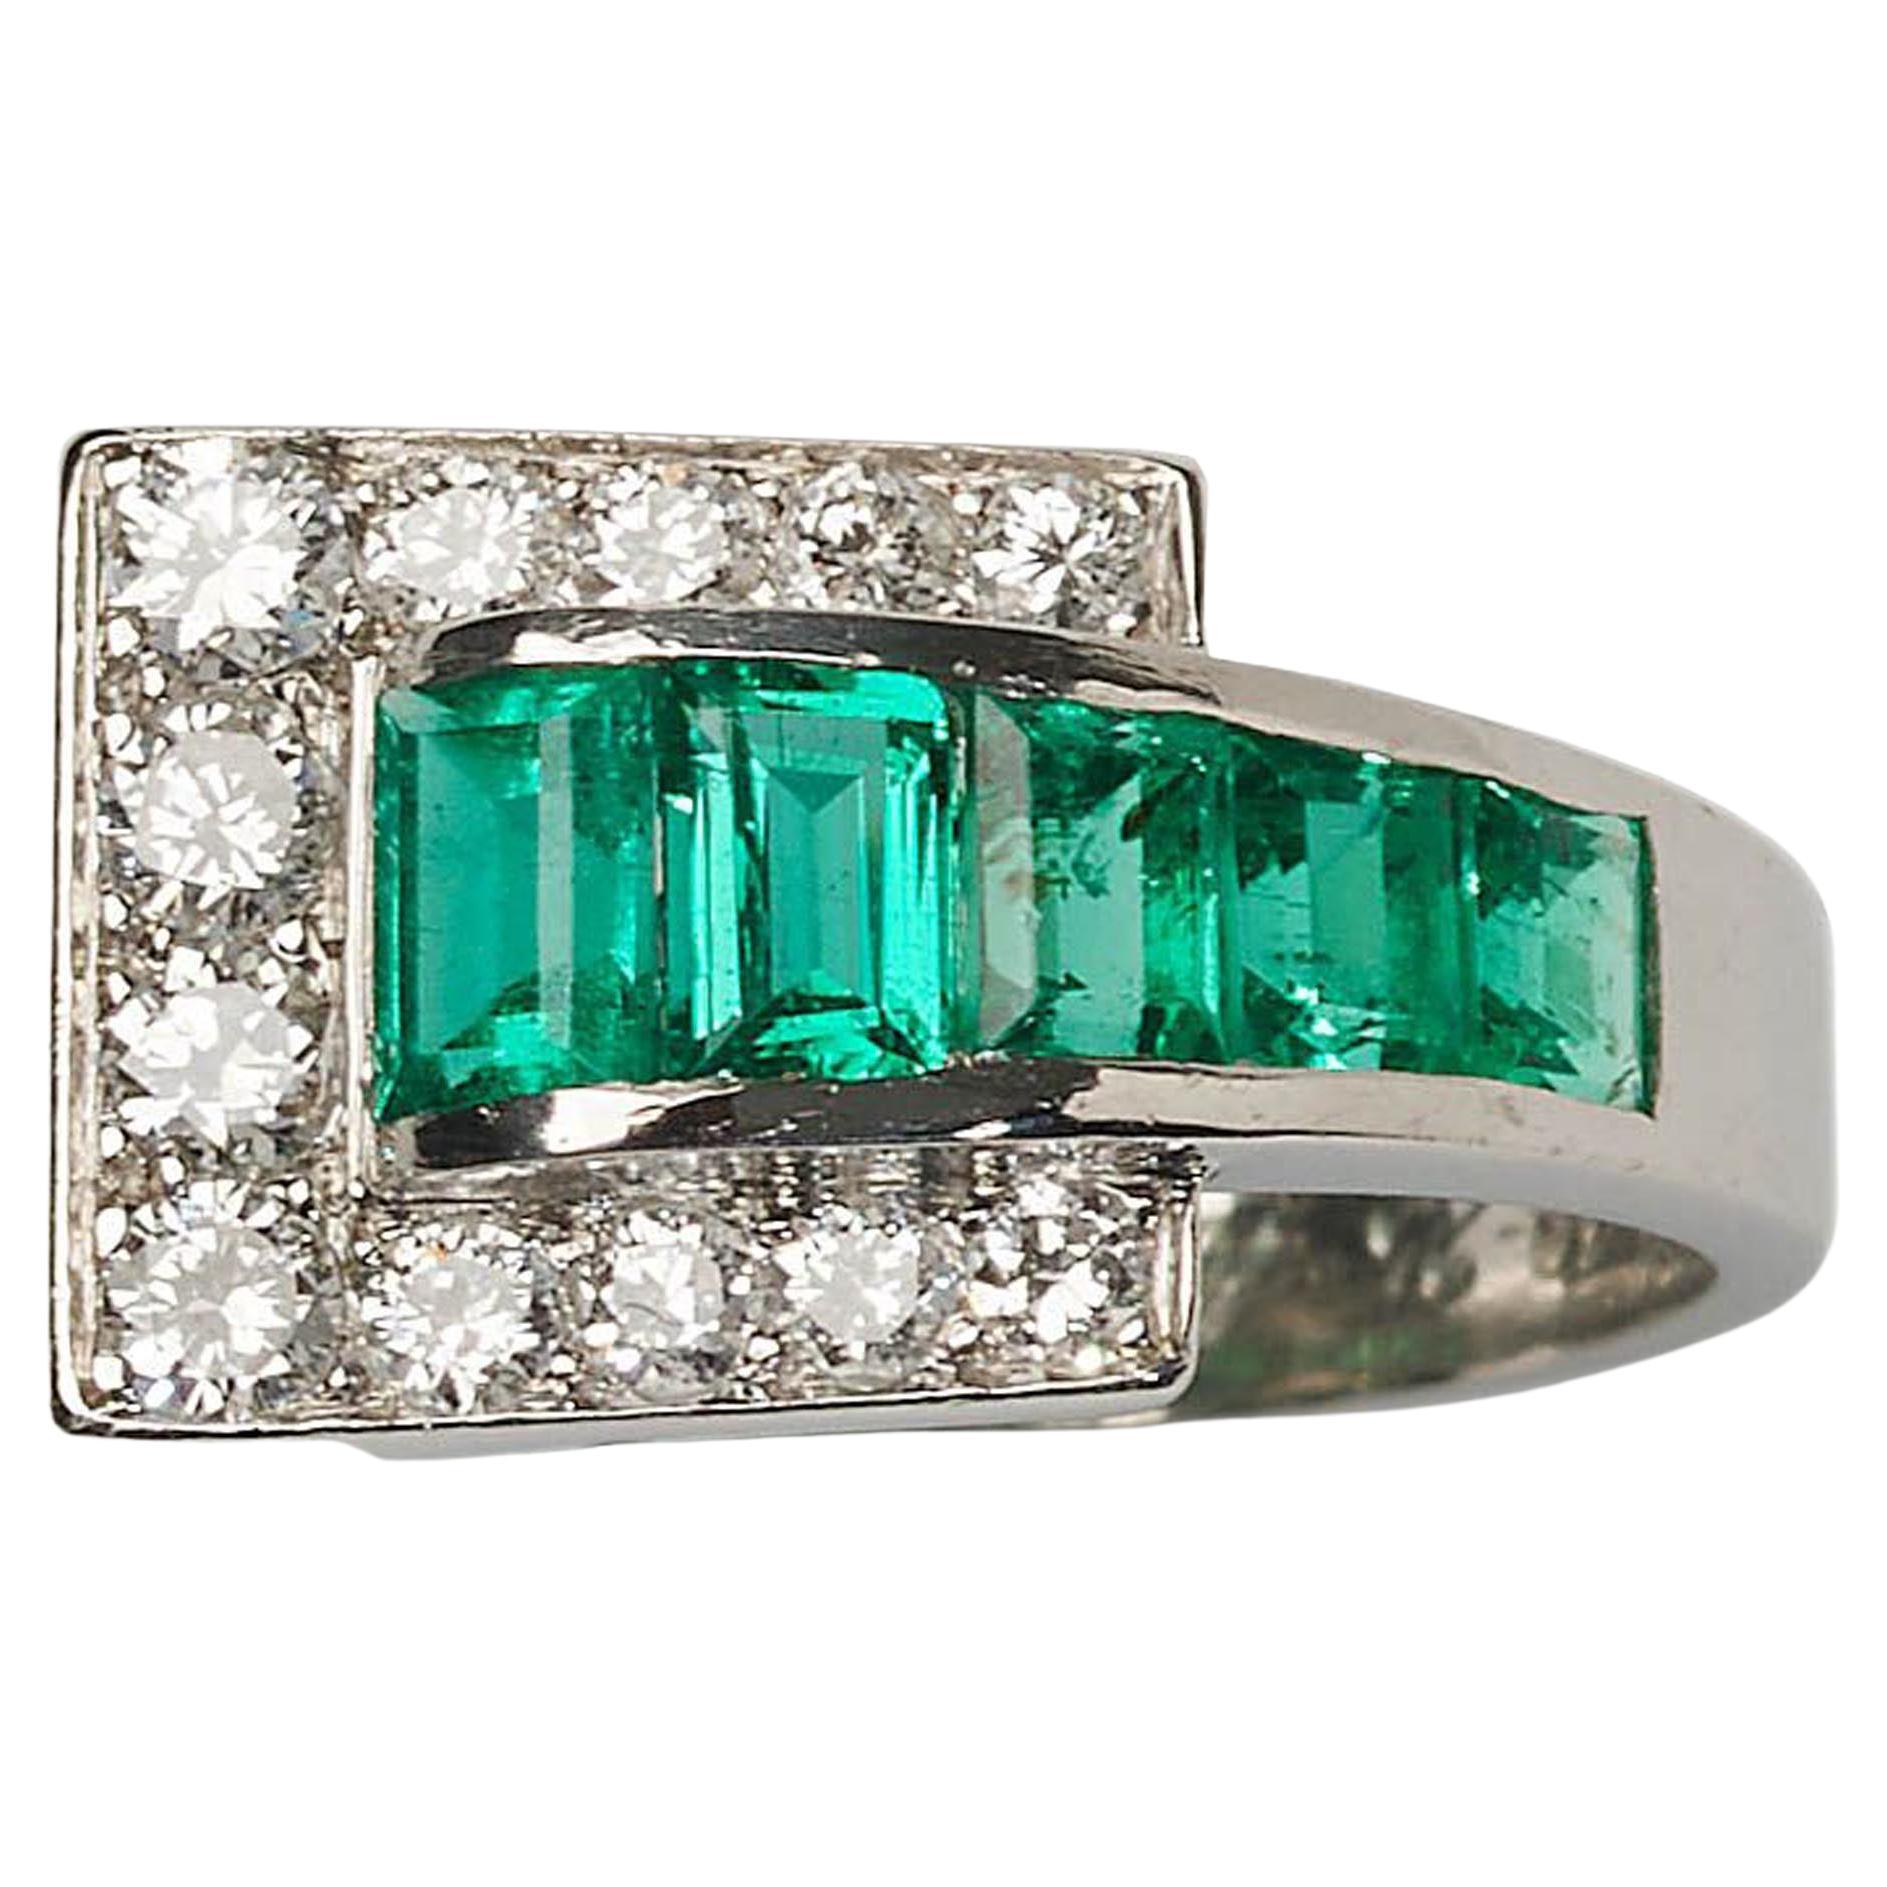 Vintage Tiffany & Co. Emerald, Diamond and Platinum Tank Ring, Dated 1940